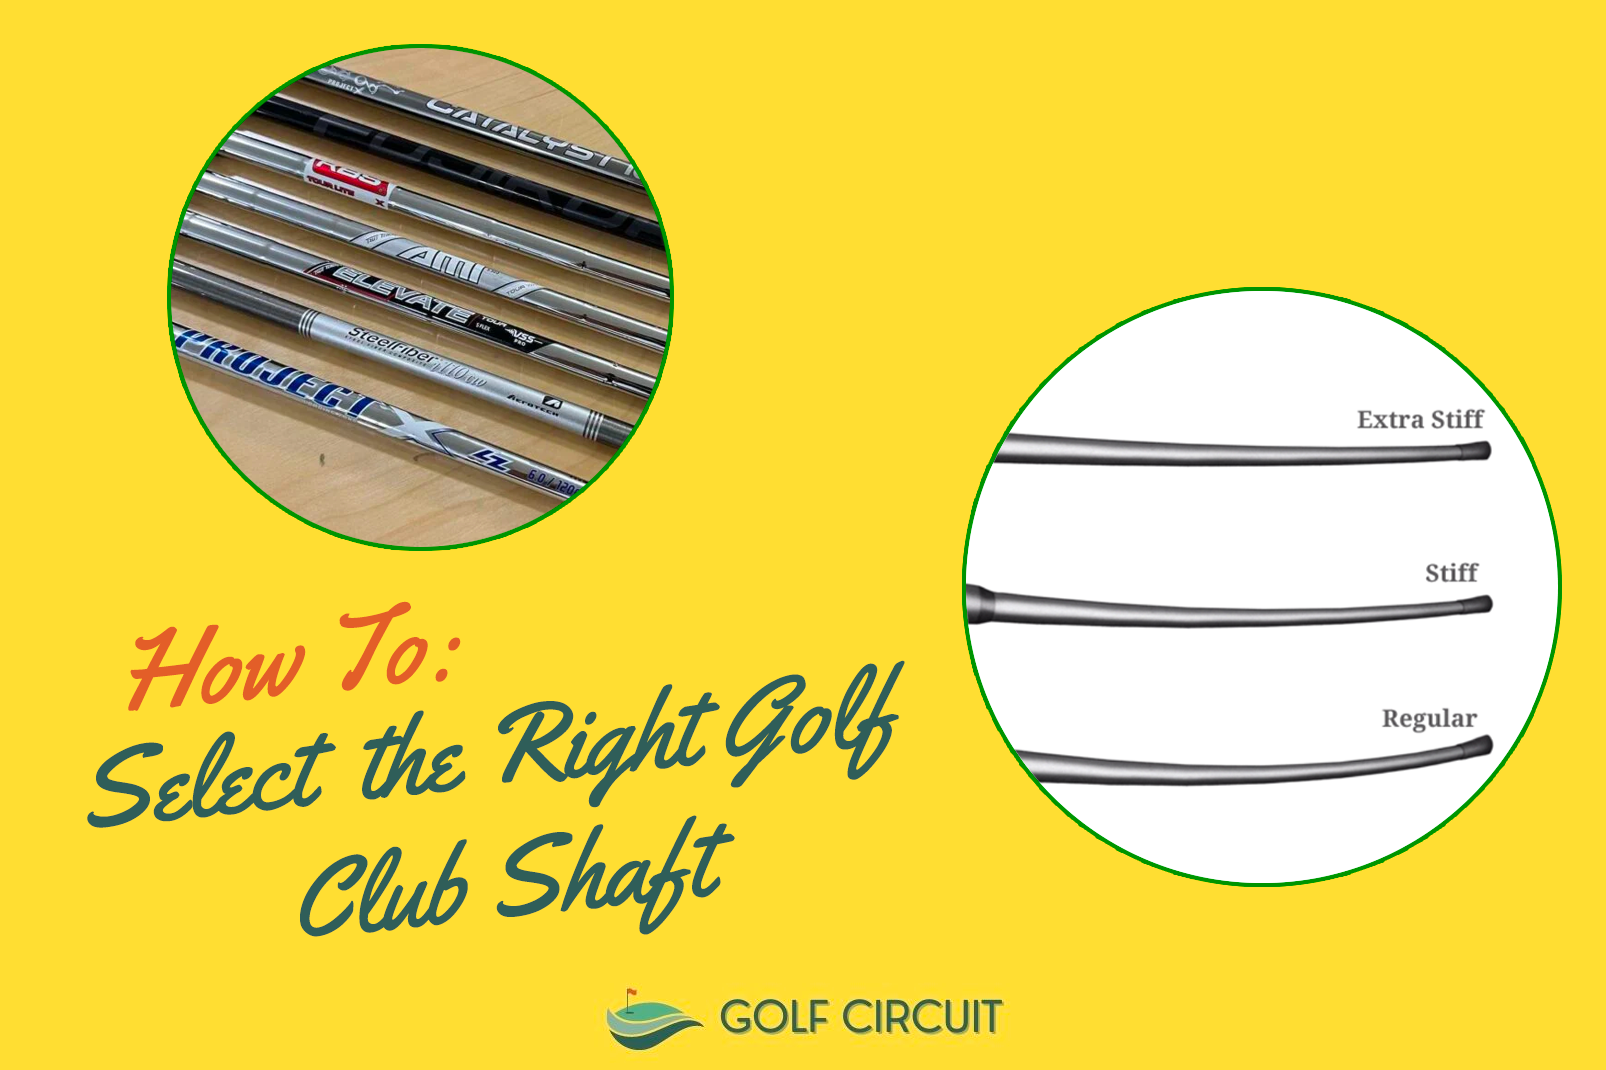 How to Select the Right Golf Club Shaft